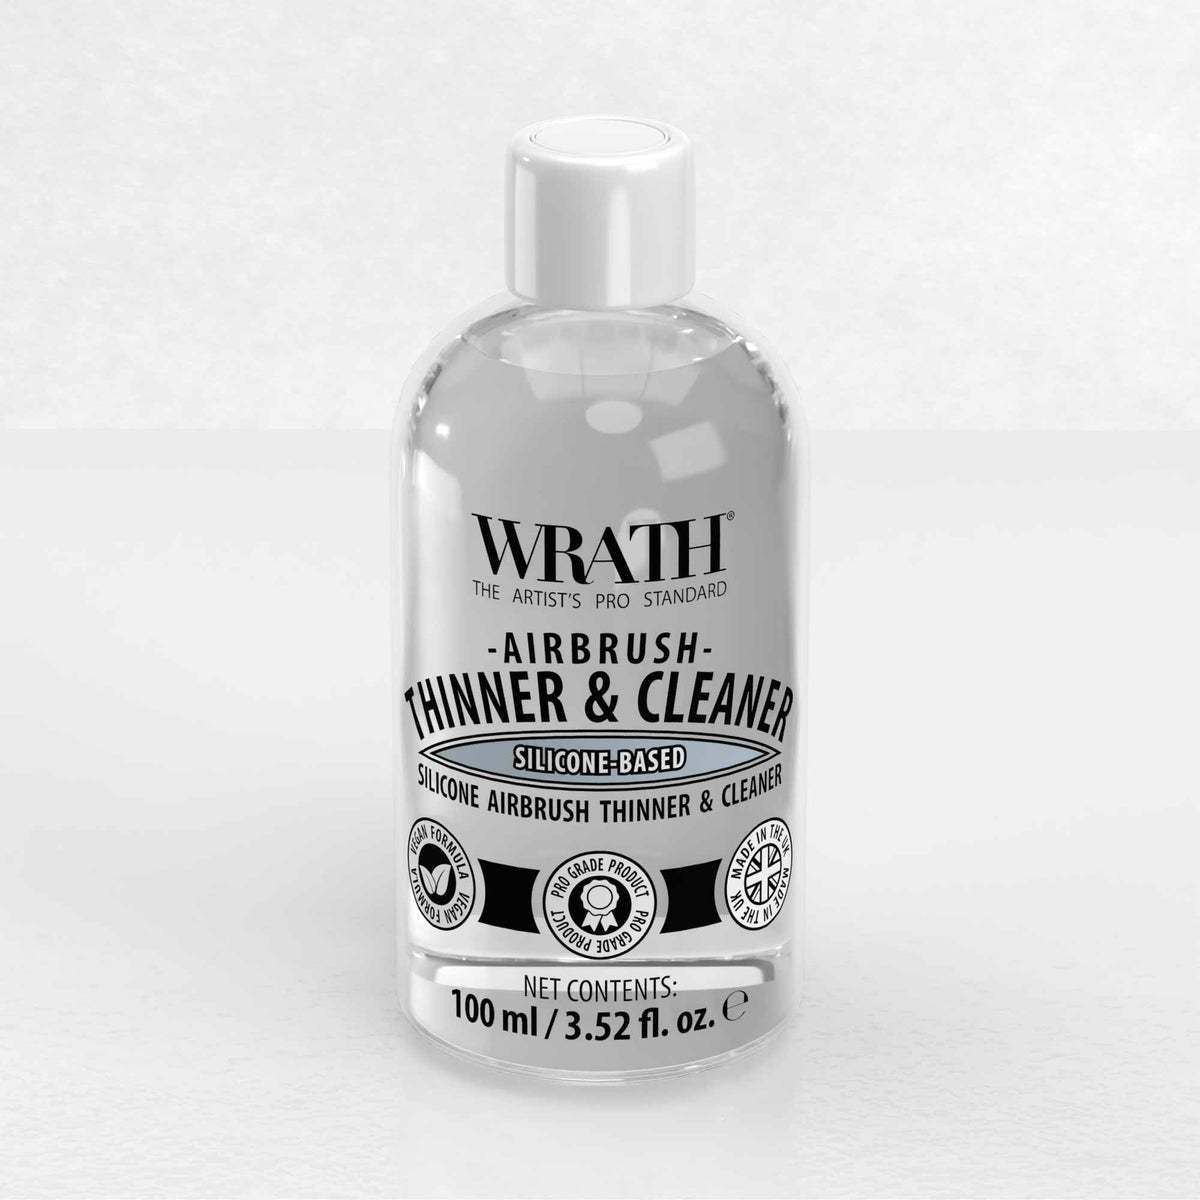 WRATH Silicone-based Airbrush Thinner &amp; Cleaner